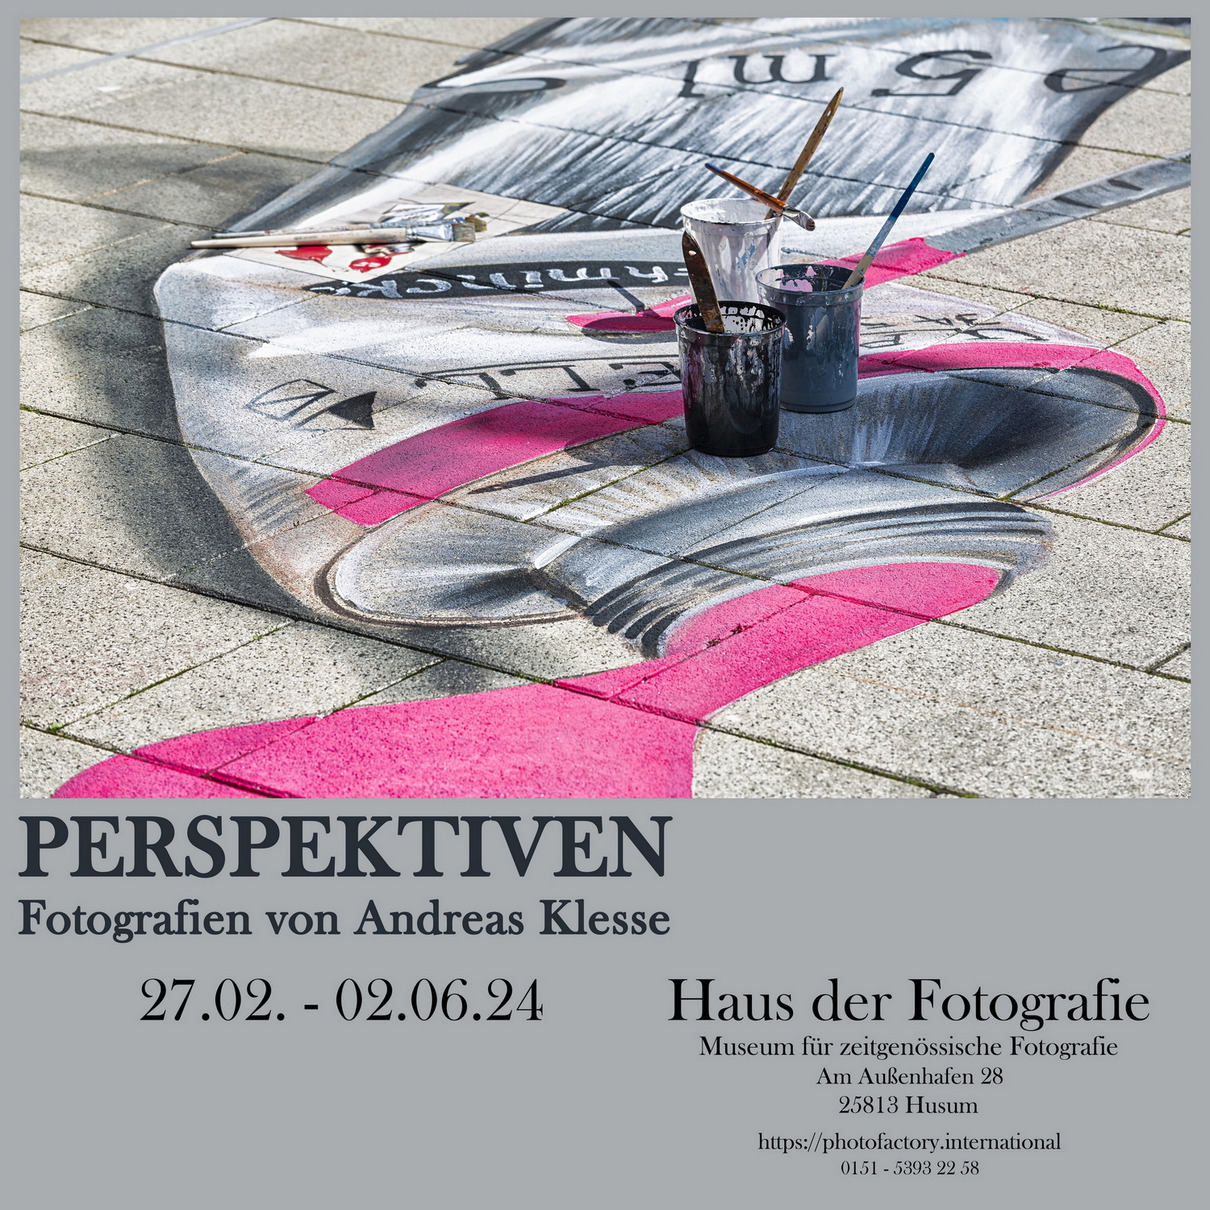 Fotoausstellung Perspektiven - Andreas Klesse